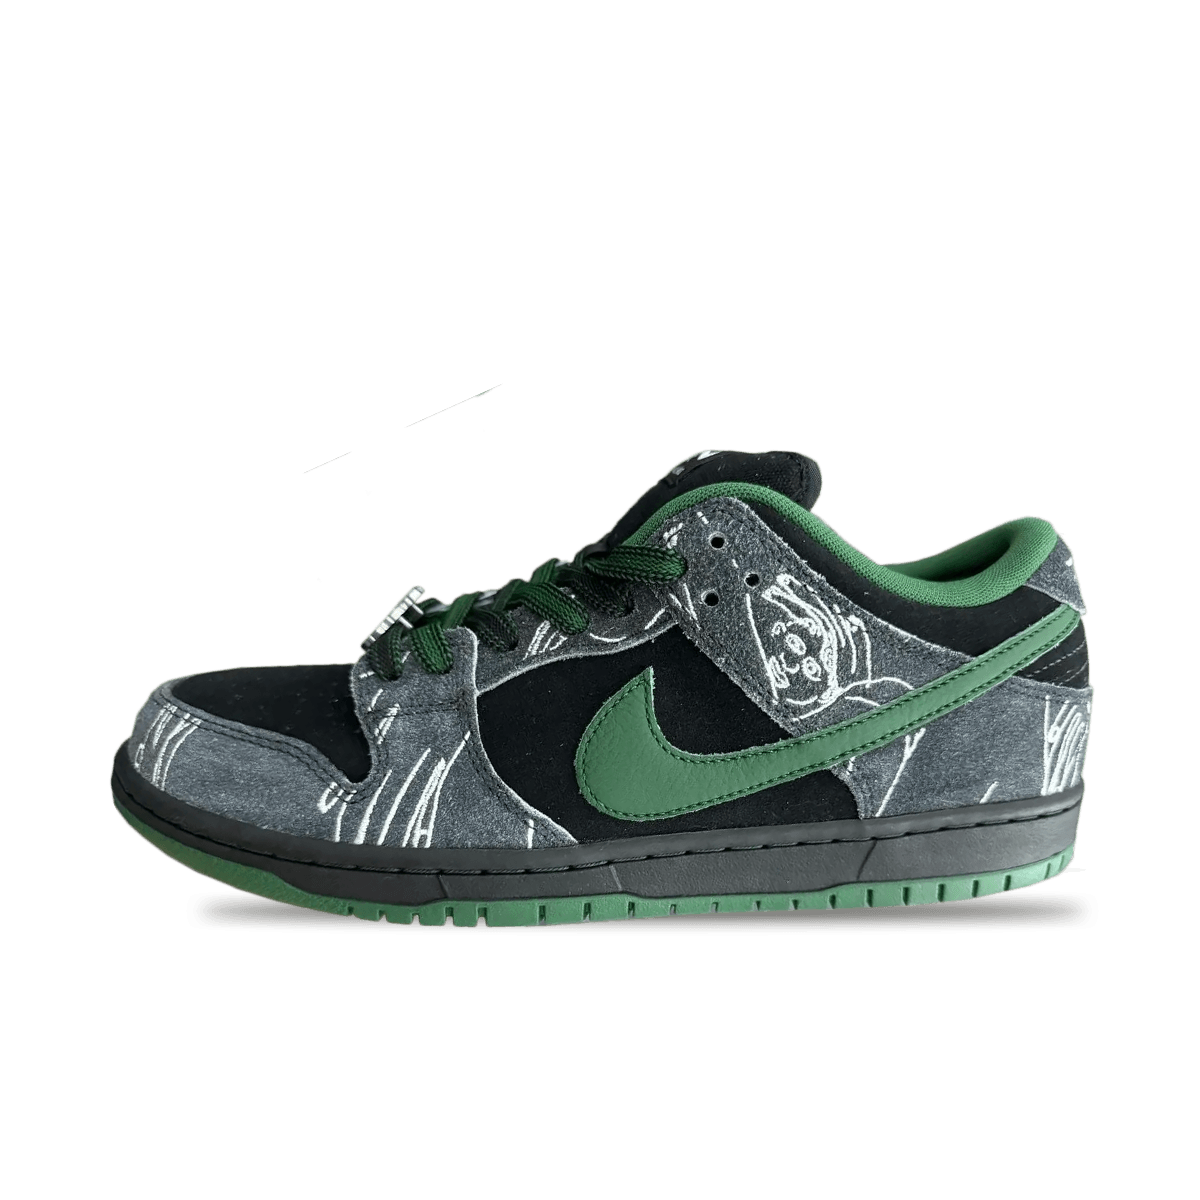 There Skateboards x Nike SB Dunk Low 'Gorge Green' HF7743-001